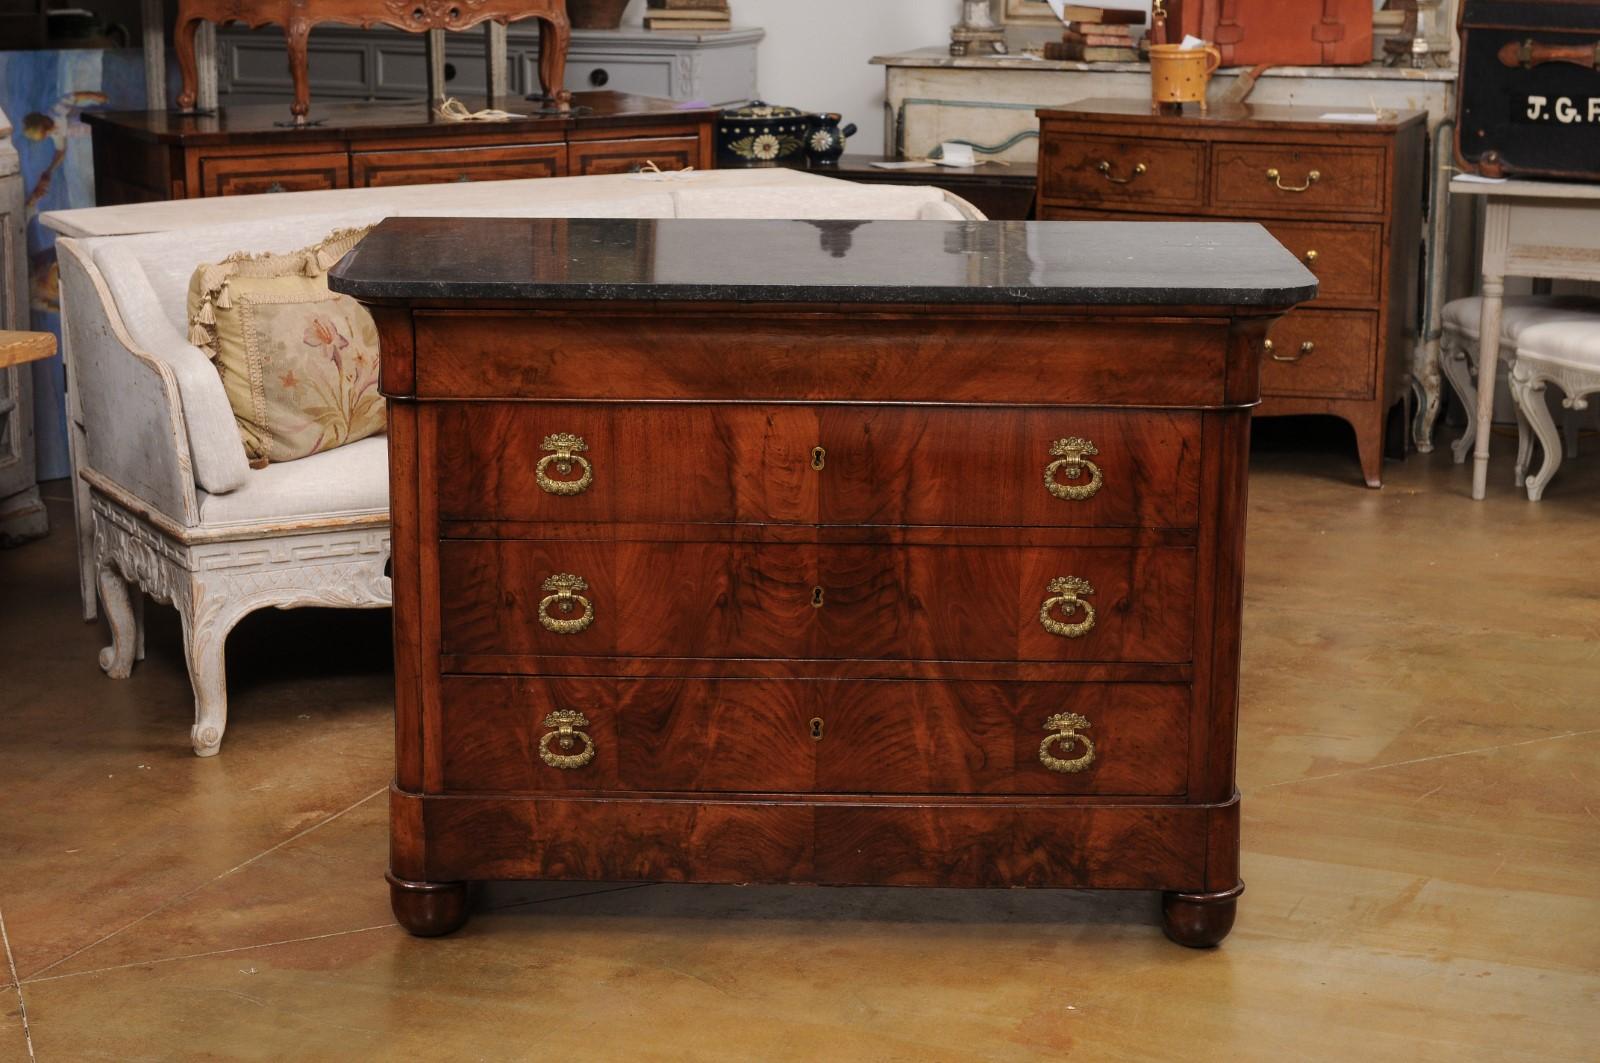 Italian Empire Style 1890s Marble Top Four-Drawer Commode with Bronze Hardware For Sale 8